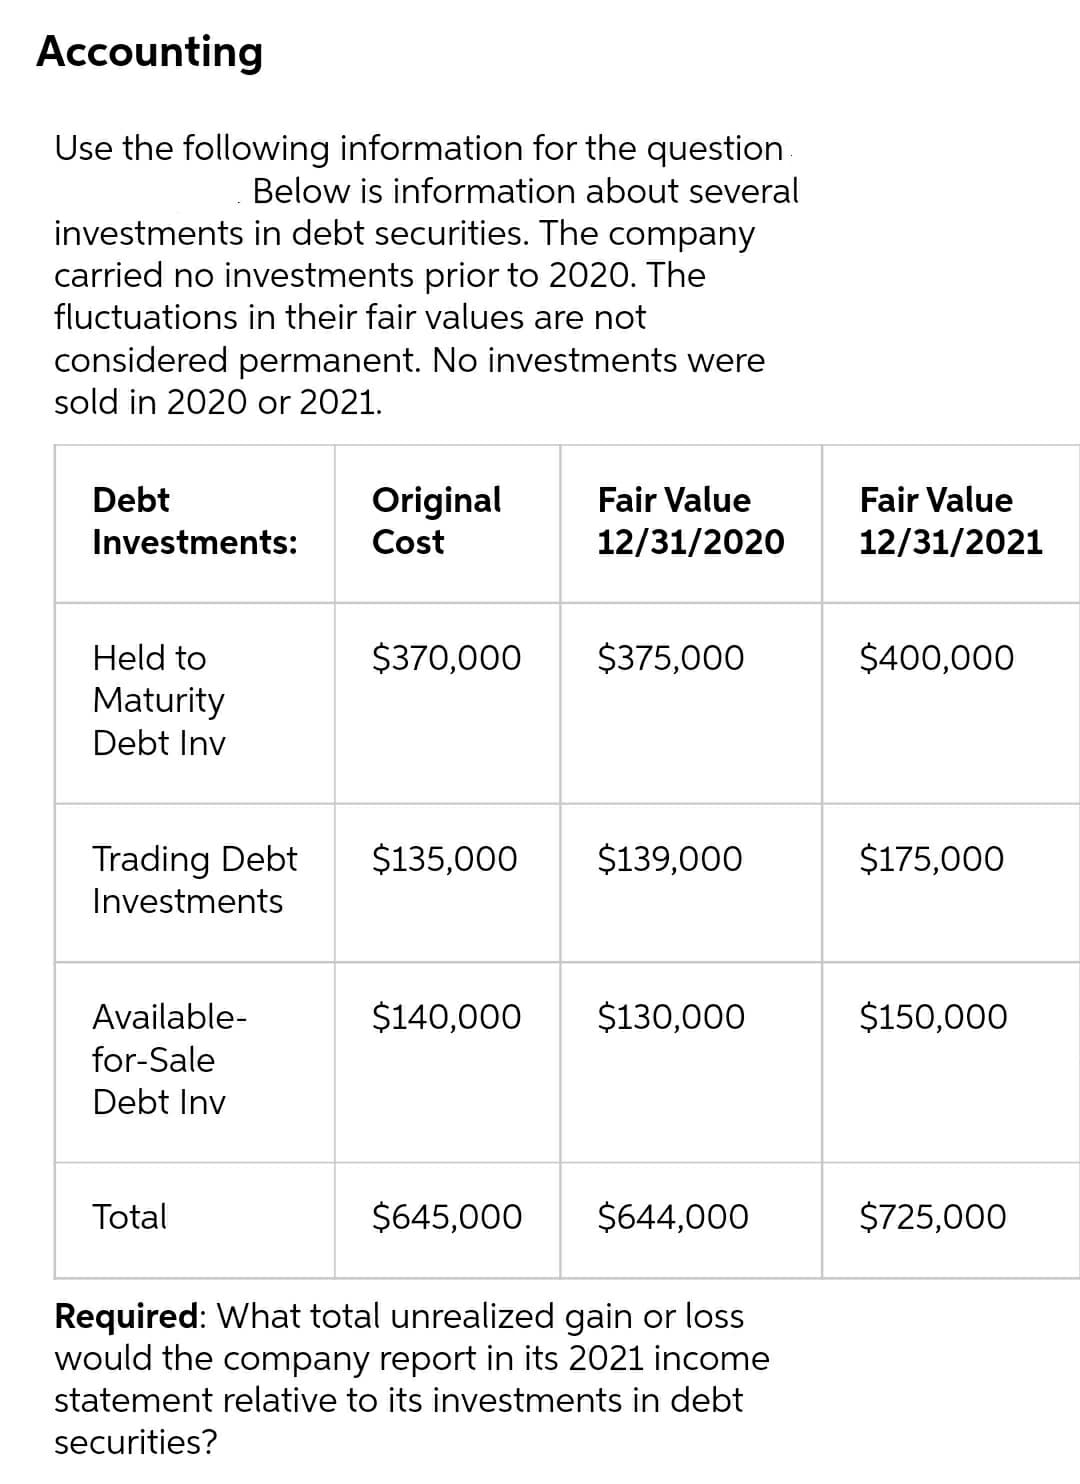 Accounting
Use the following information for the question
Below is information about several
investments in debt securities. The company
carried no investments prior to 2020. The
fluctuations in their fair values are not
considered permanent. No investments were
sold in 2020 or 2021.
Debt
Original
Fair Value
Fair Value
Investments:
Cost
12/31/2020
12/31/2021
Held to
$370,000
$375,000
$400,000
Maturity
Debt Inv
Trading Debt
Investments
$135,000
$139,000
$175,000
Available-
$140,000
$130,000
$150,000
for-Sale
Debt Inv
Total
$645,000
$644,000
$725,000
Required: What total unrealized gain or loss
would the company report in its 2021 income
statement relative to its investments in debt
securities?
